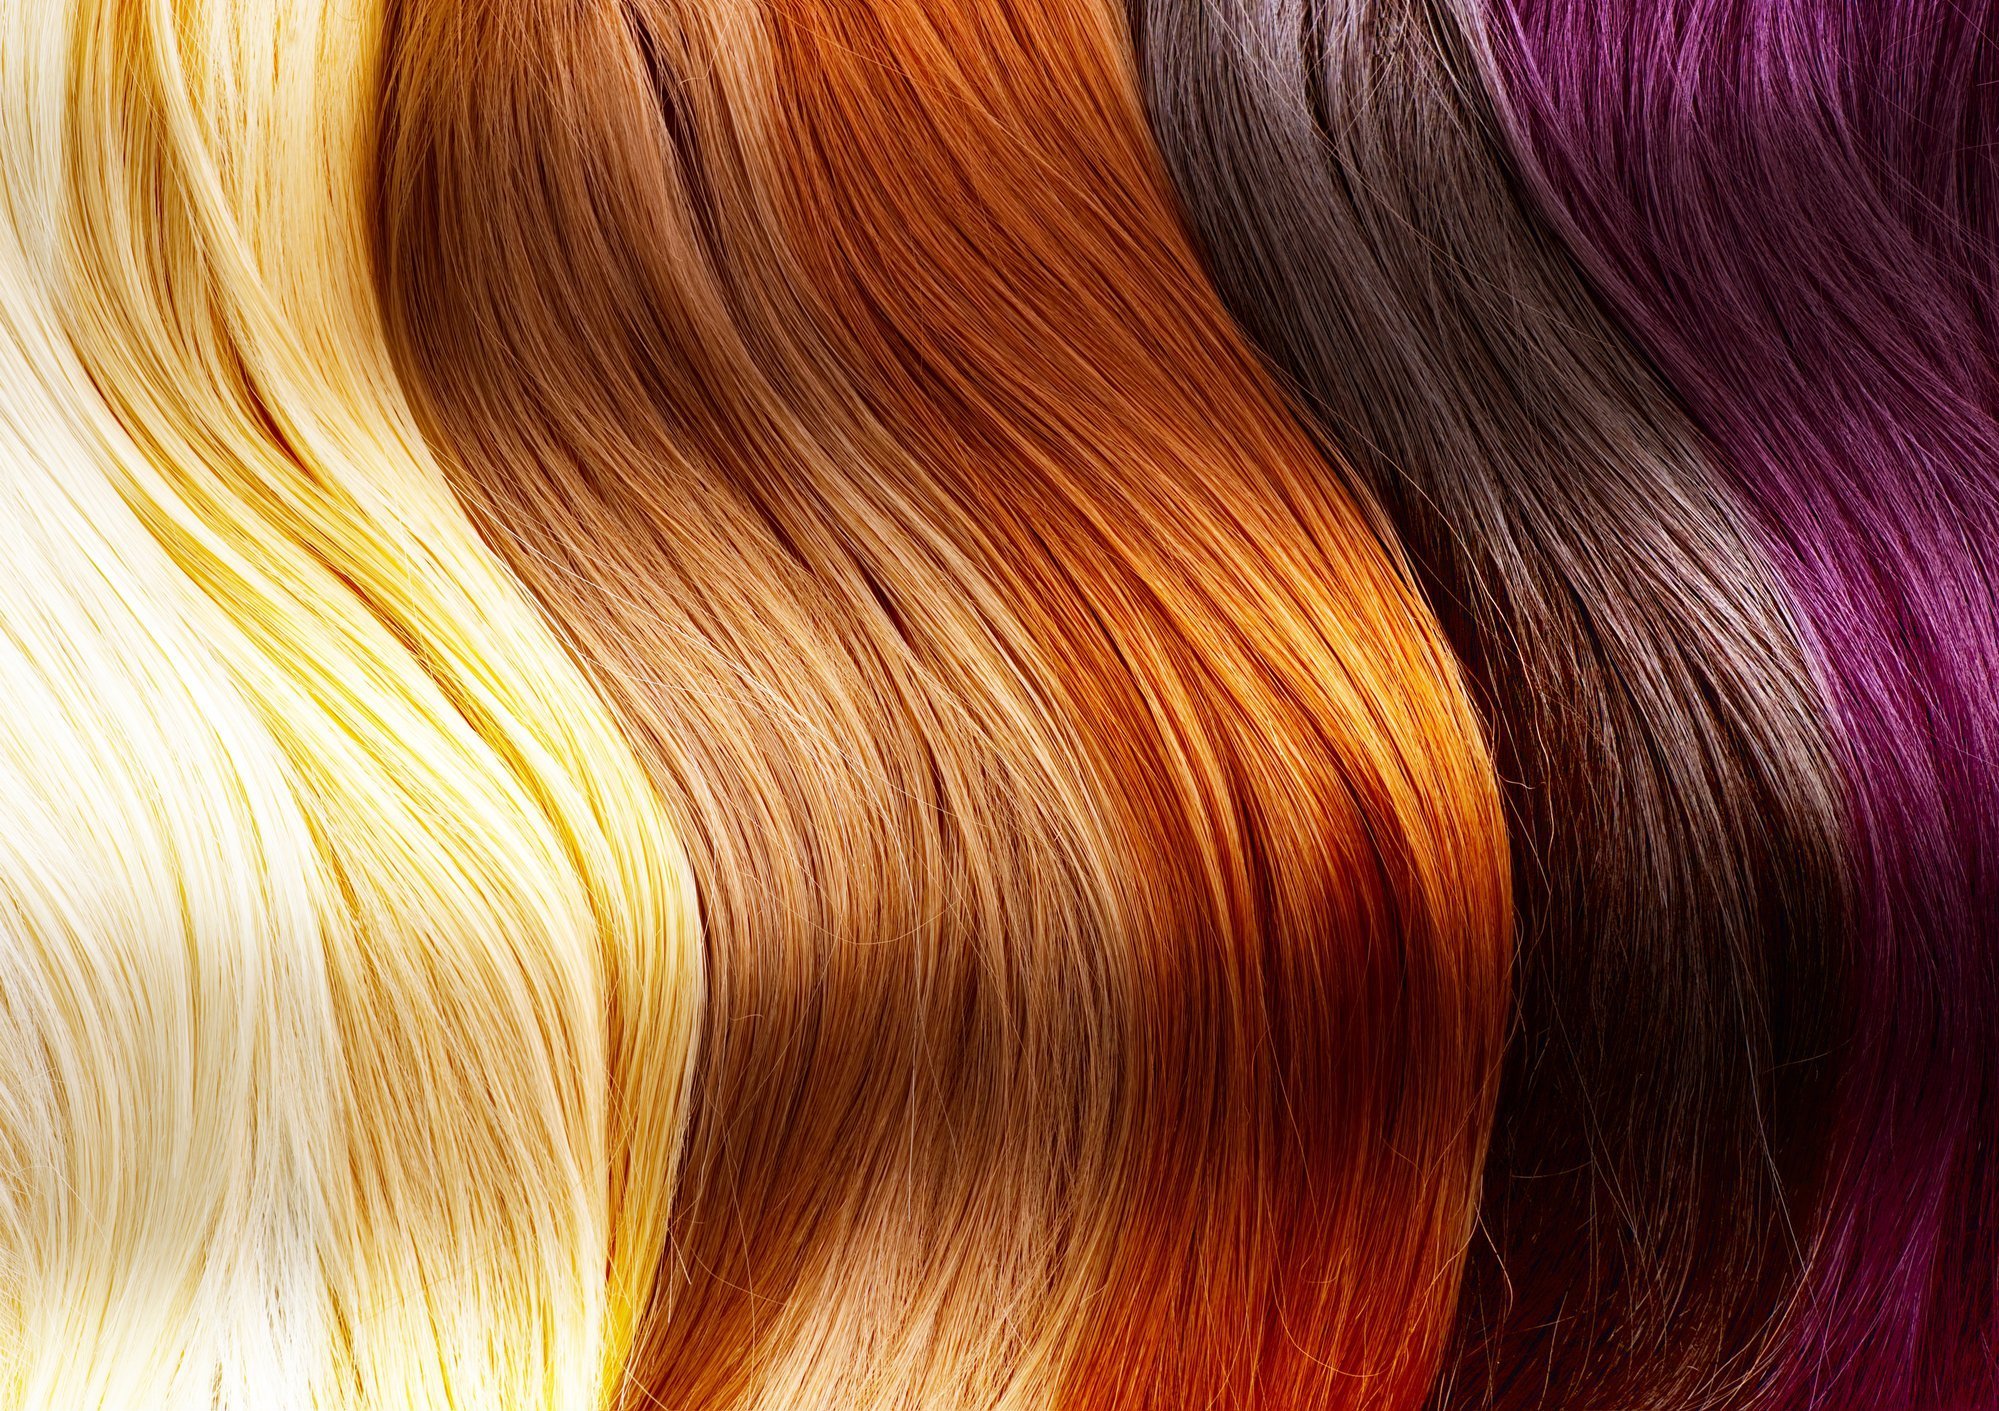 Hair Color Guide 101 - Your Brand Of Beauty